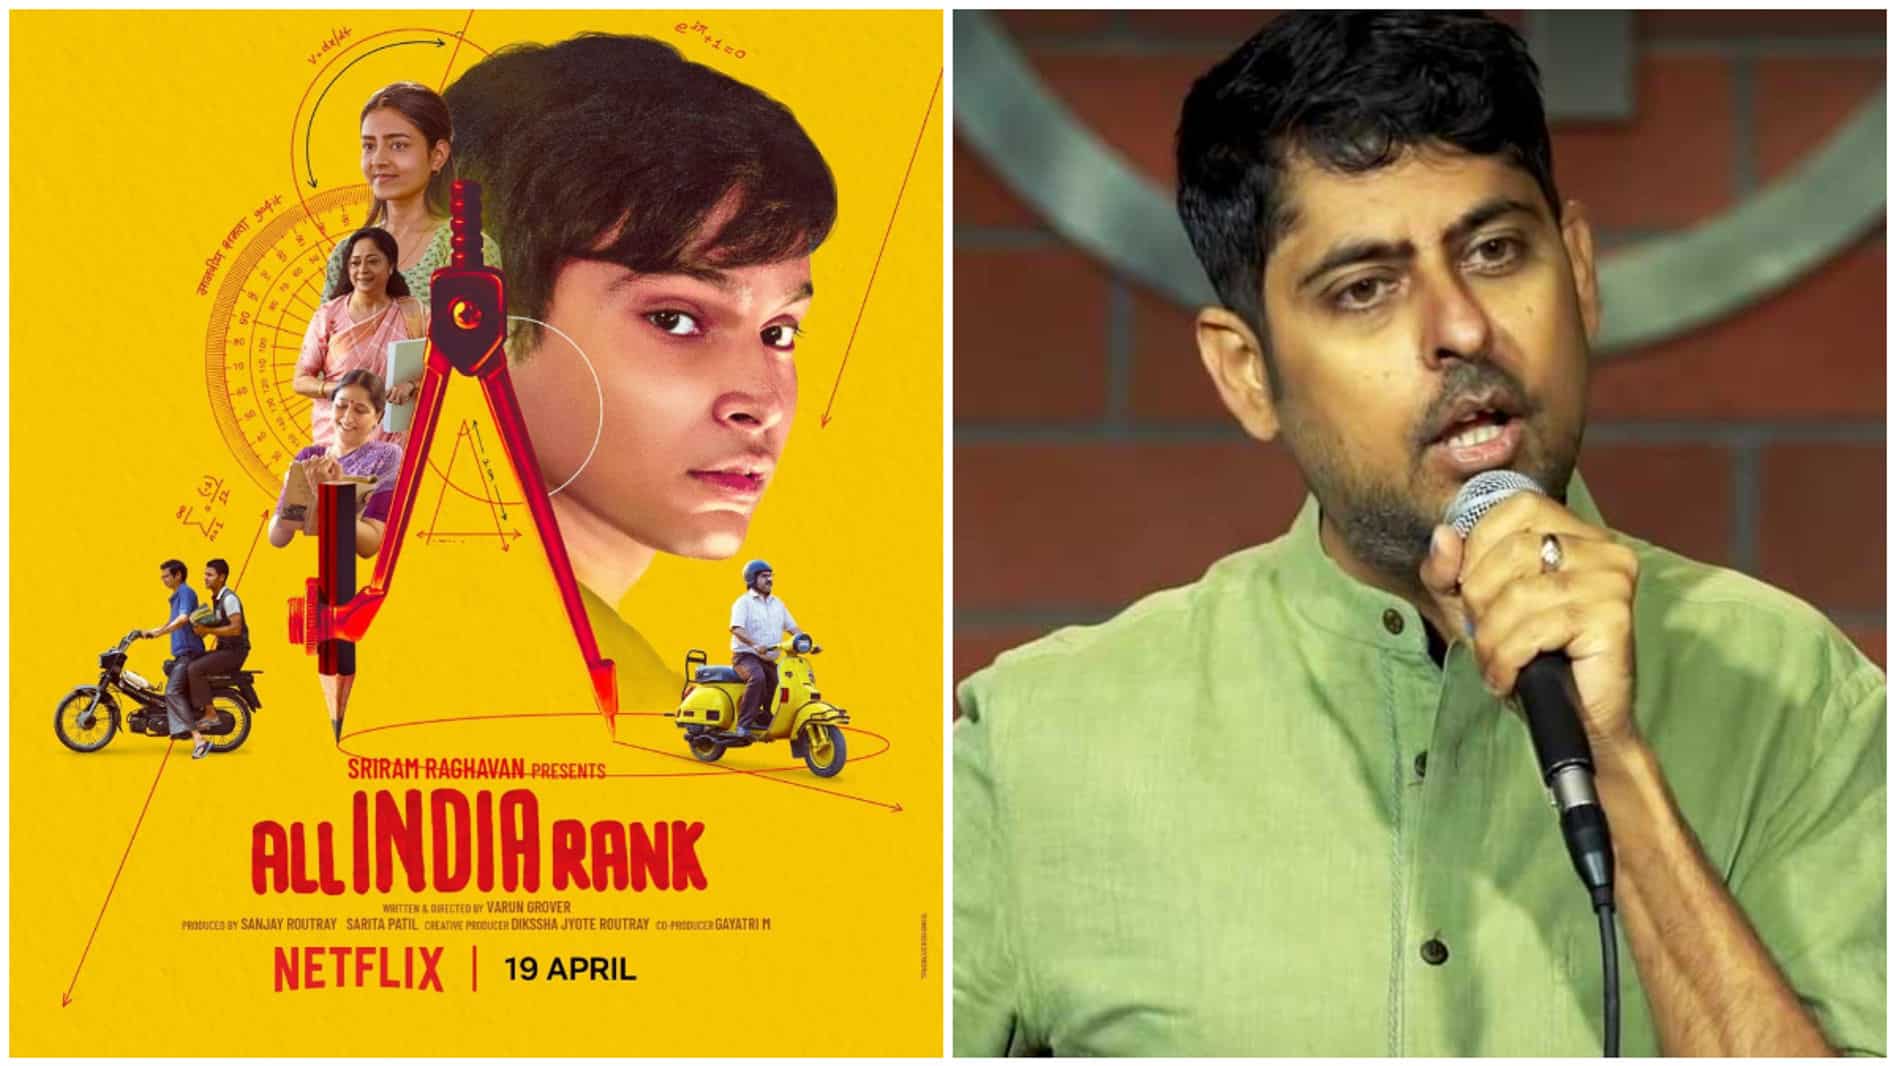 https://www.mobilemasala.com/movies/All-India-Rank-OTT-release-date-Here-is-when-and-where-you-can-watch-the-Varun-Grover-directorial-i255046